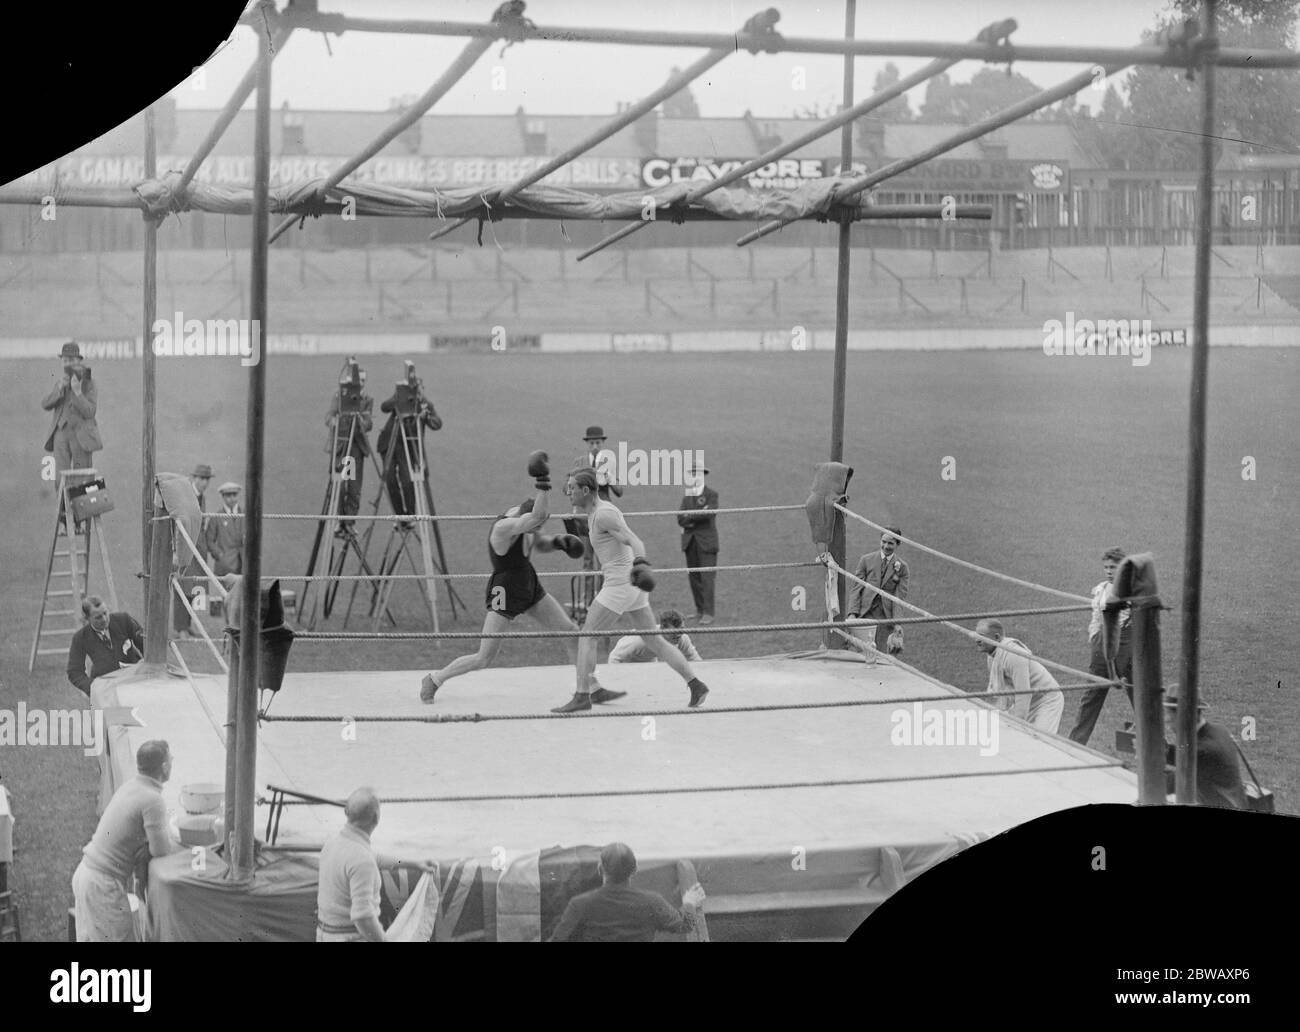 Boxing Help Dockland Boxing tournament at Tottenham Hotspurs Ground White Hart Lane in aid of the dockland settlement Georges Carpentier sparring with Harry Drake 29 July 1922 Stock Photo